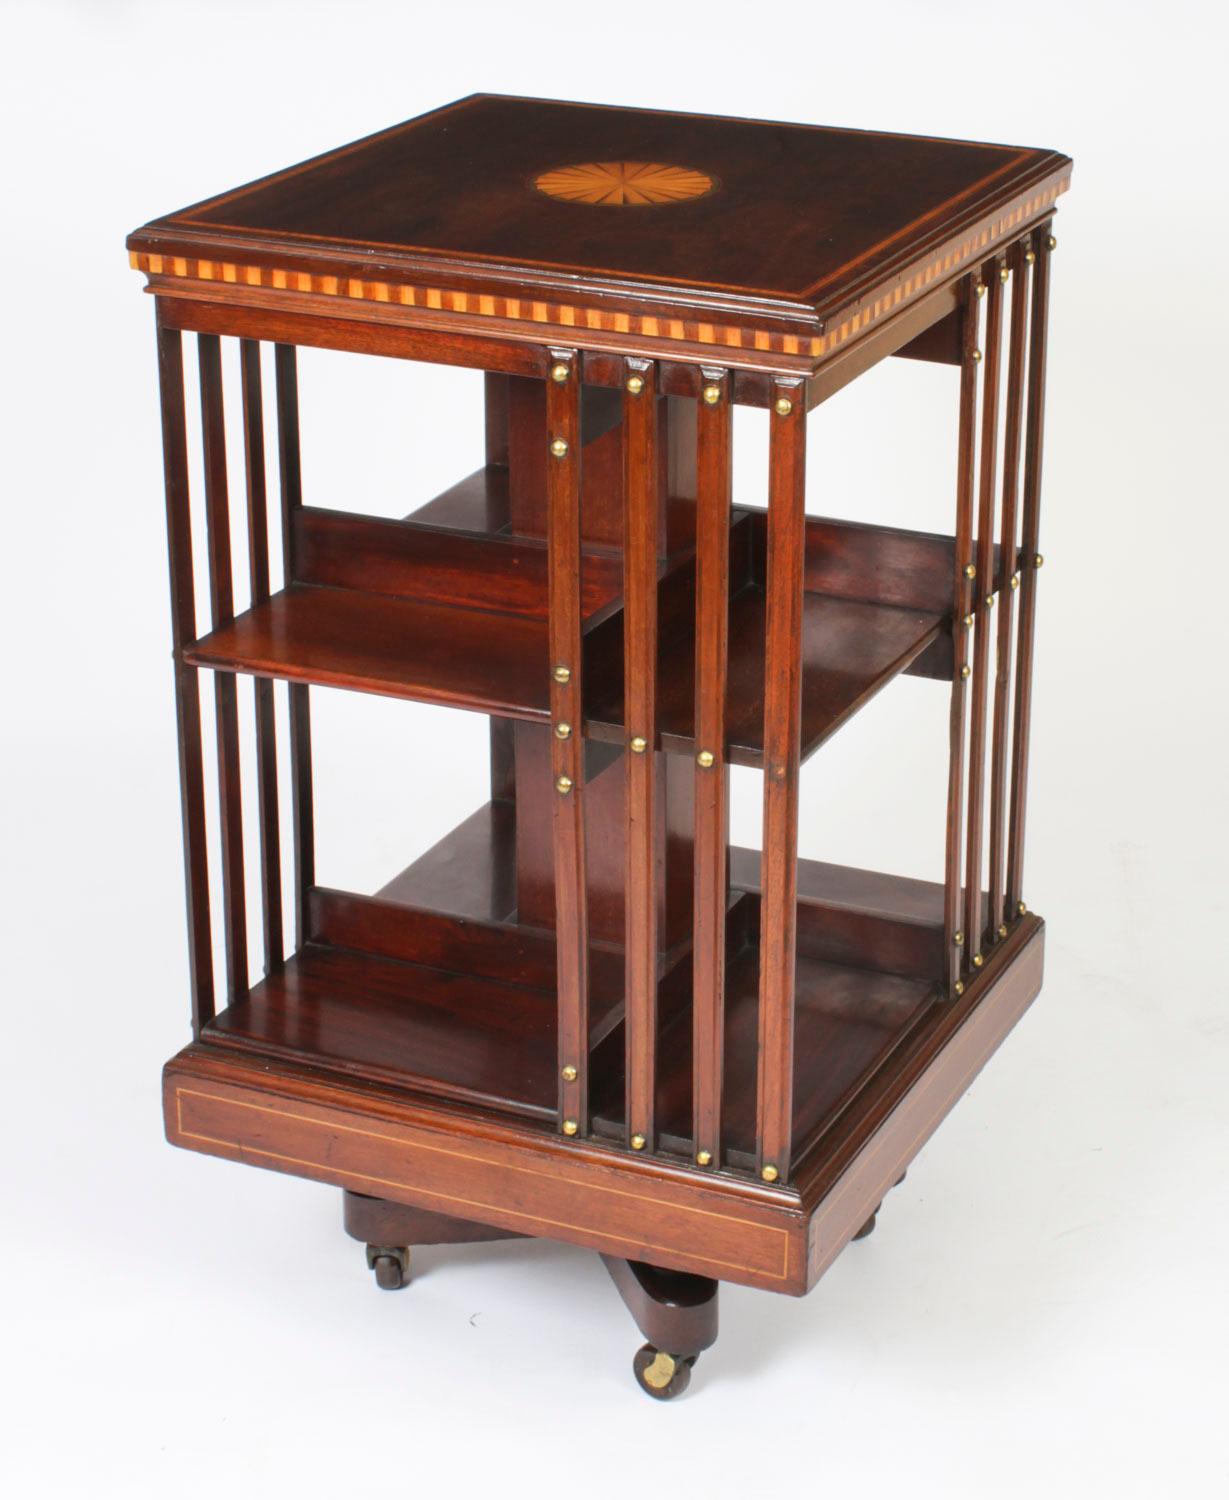 This an exquisite antique revolving bookcase  attributed to the renowned Victorian retailer and manufacturer Maple & Co., circa 1900.

It is made of mahogany , revolves on a solid cast iron base, has inlaid boxwood lines to the top and bottom,  the